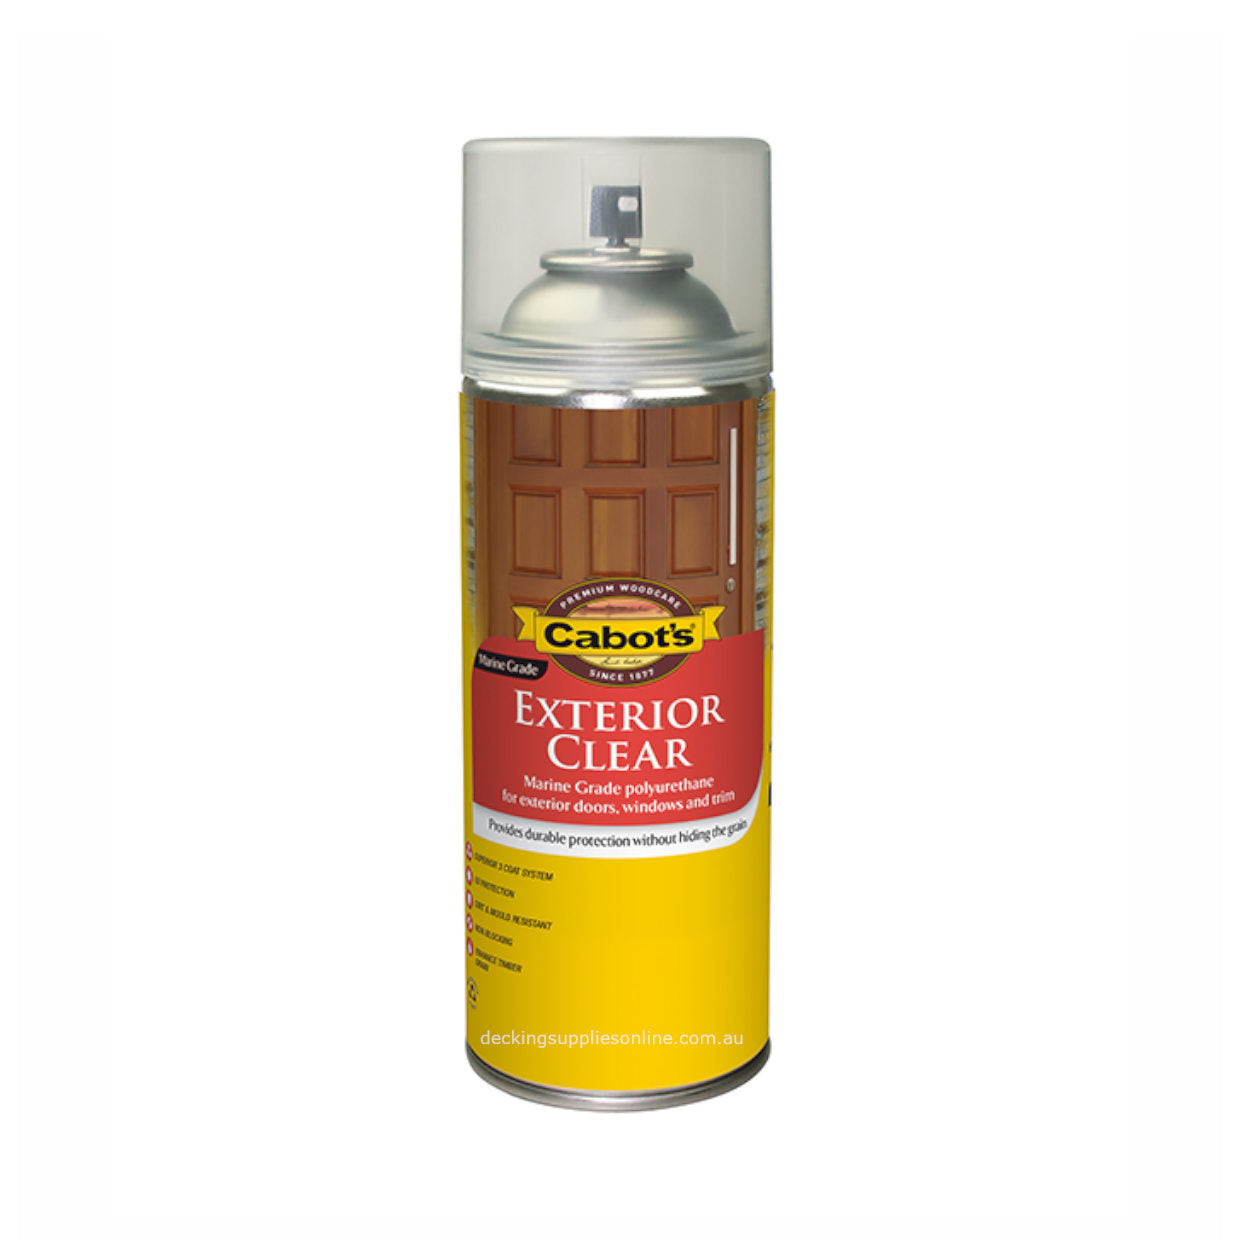 Cabots_Exterior_Clear_Oil_Based_300g_Decking_Supplies_Online